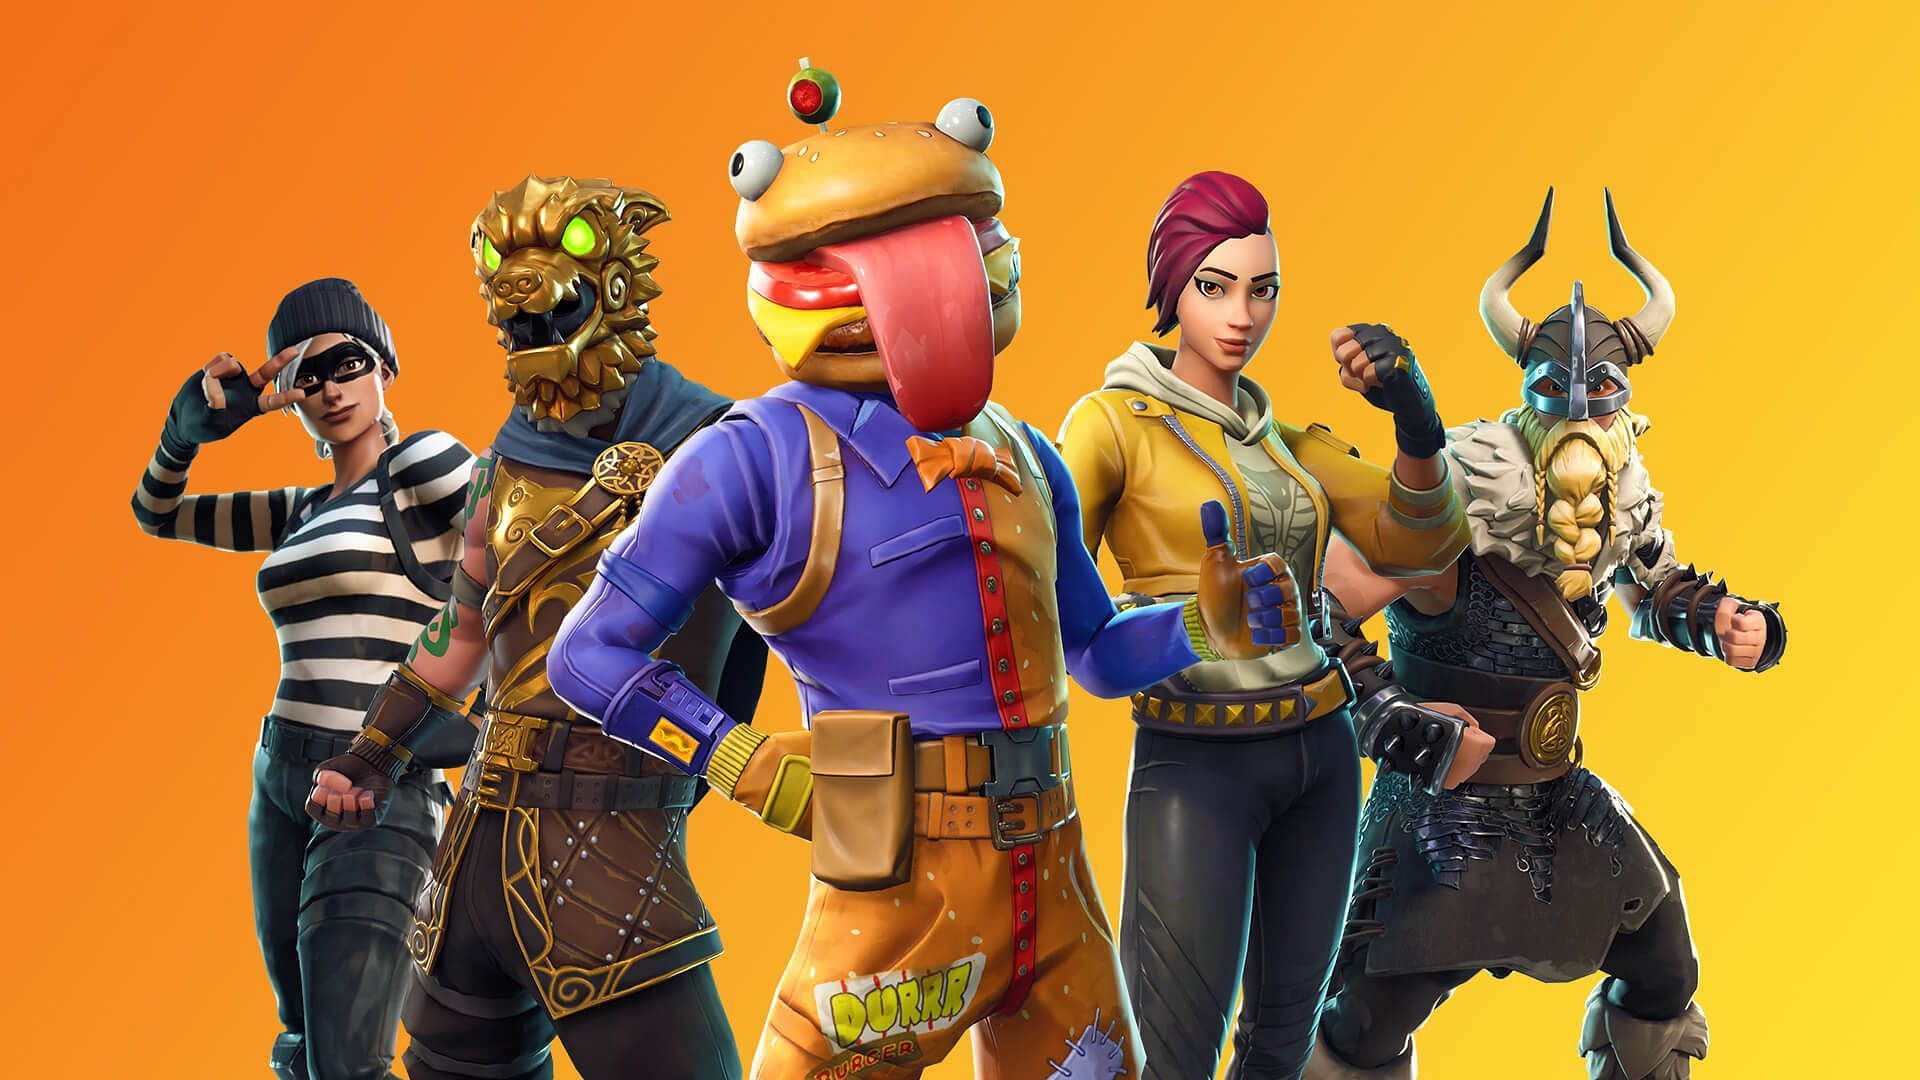 Skins and cosmetics are the subject of the fine (Image via Epic Games)